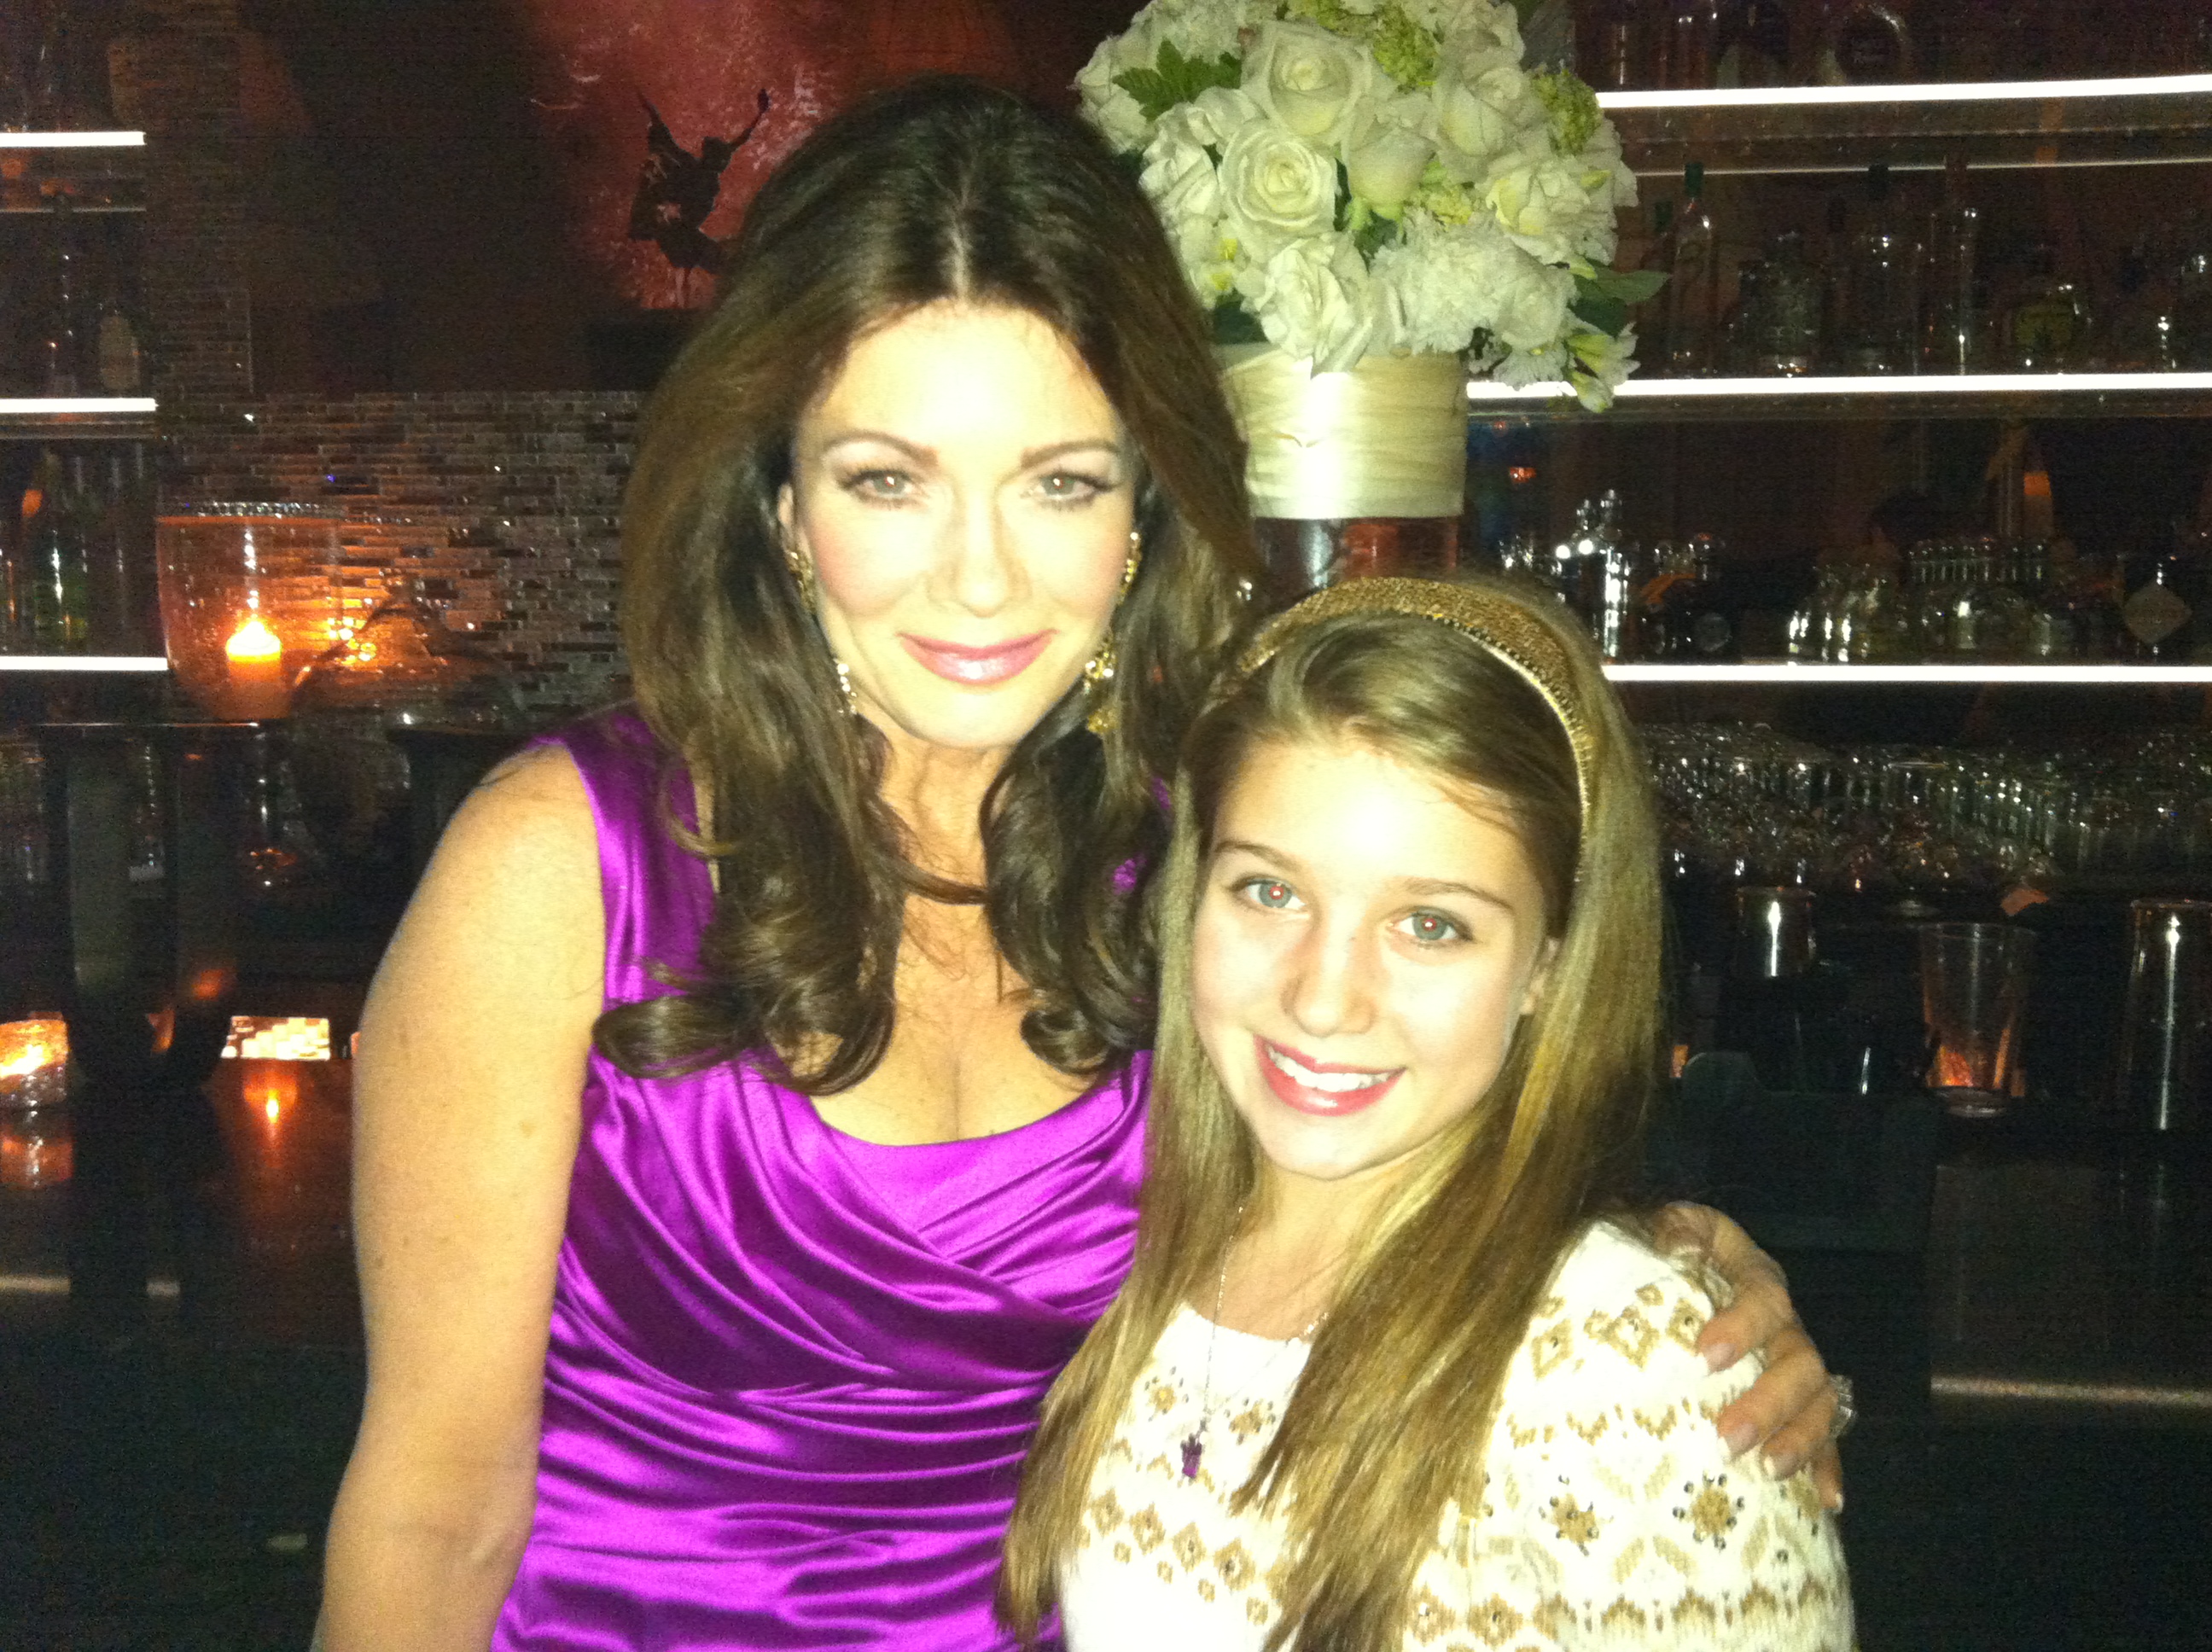 Paris with Lisa Vanderpump from The Real Housewives of Beverly Hills